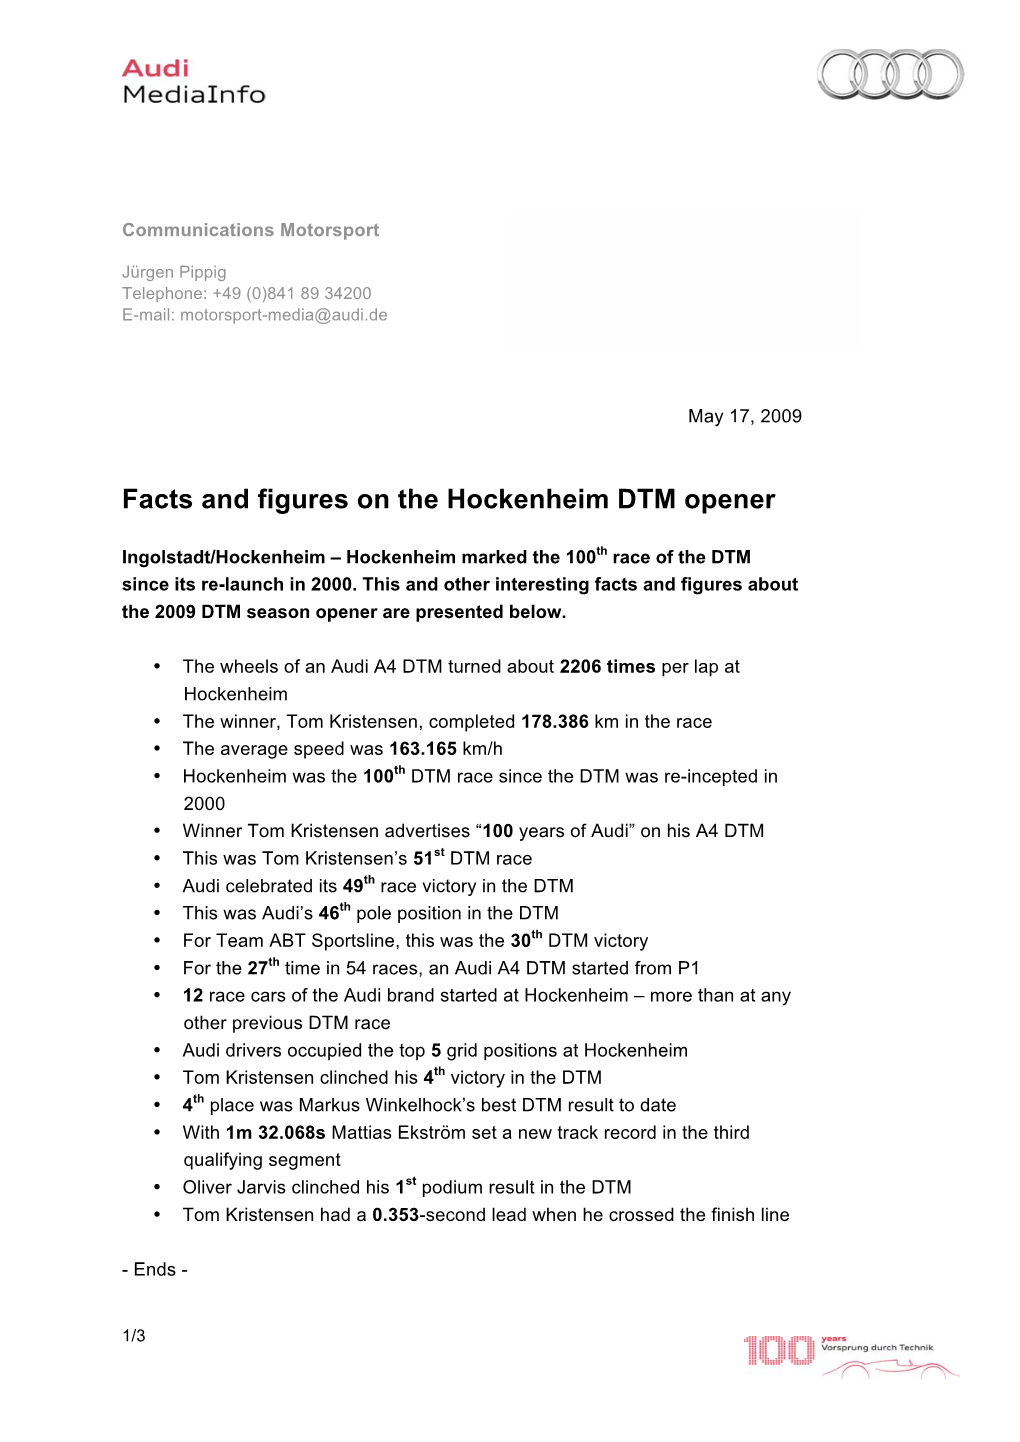 Facts and Figures on the Hockenheim DTM Opener